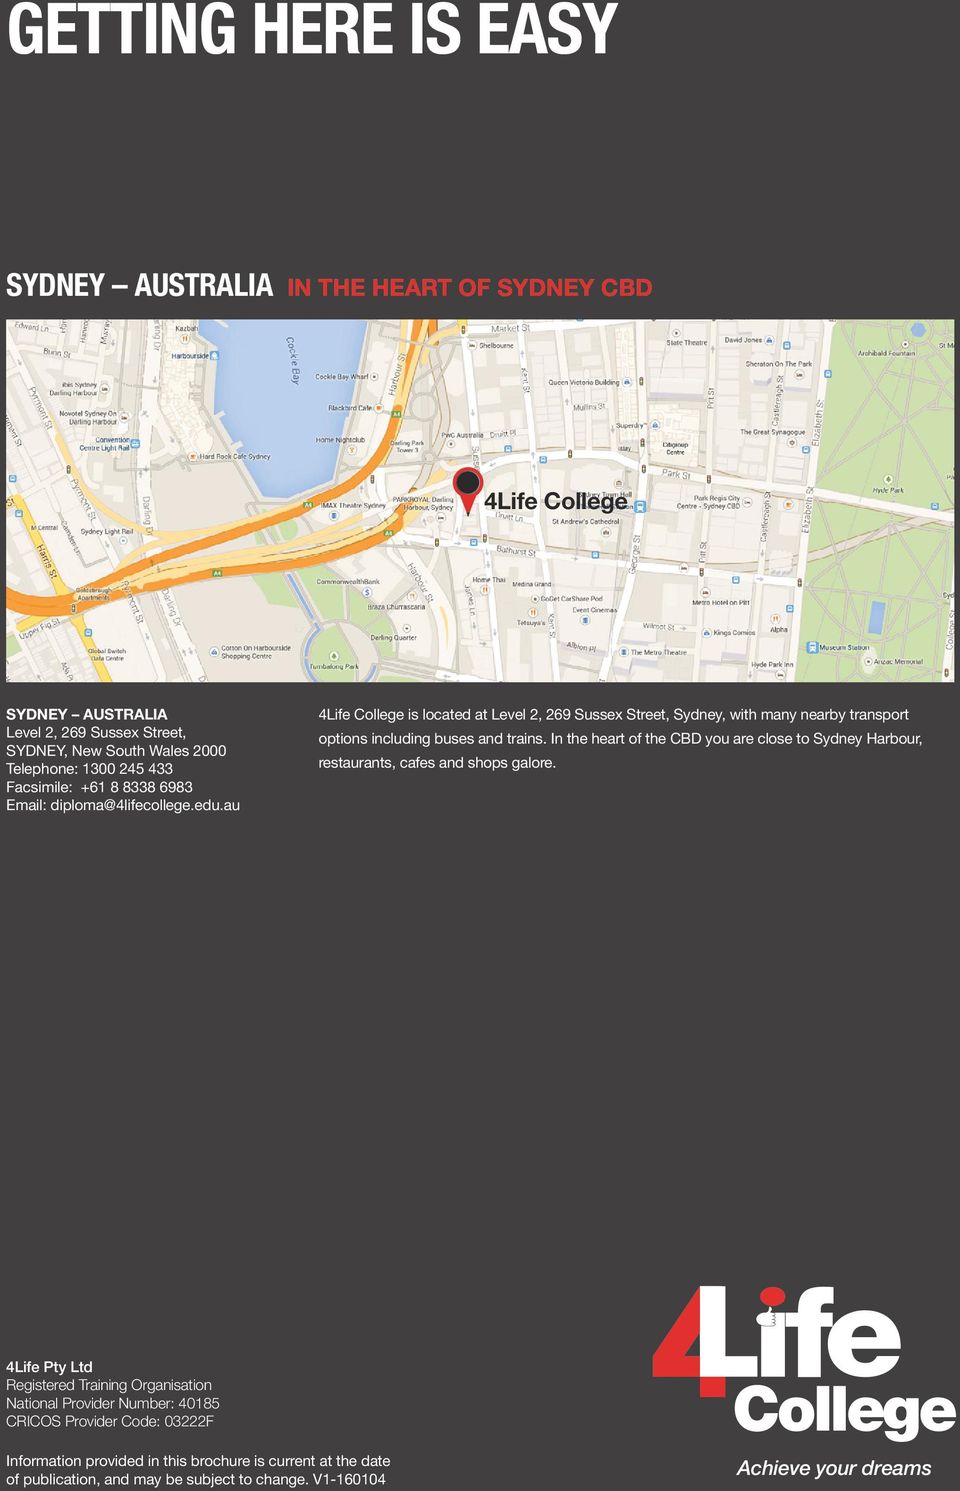 au 4Life is located at Level 2, 269 Sussex Street, Sydney, with many nearby transport options including buses and trains.